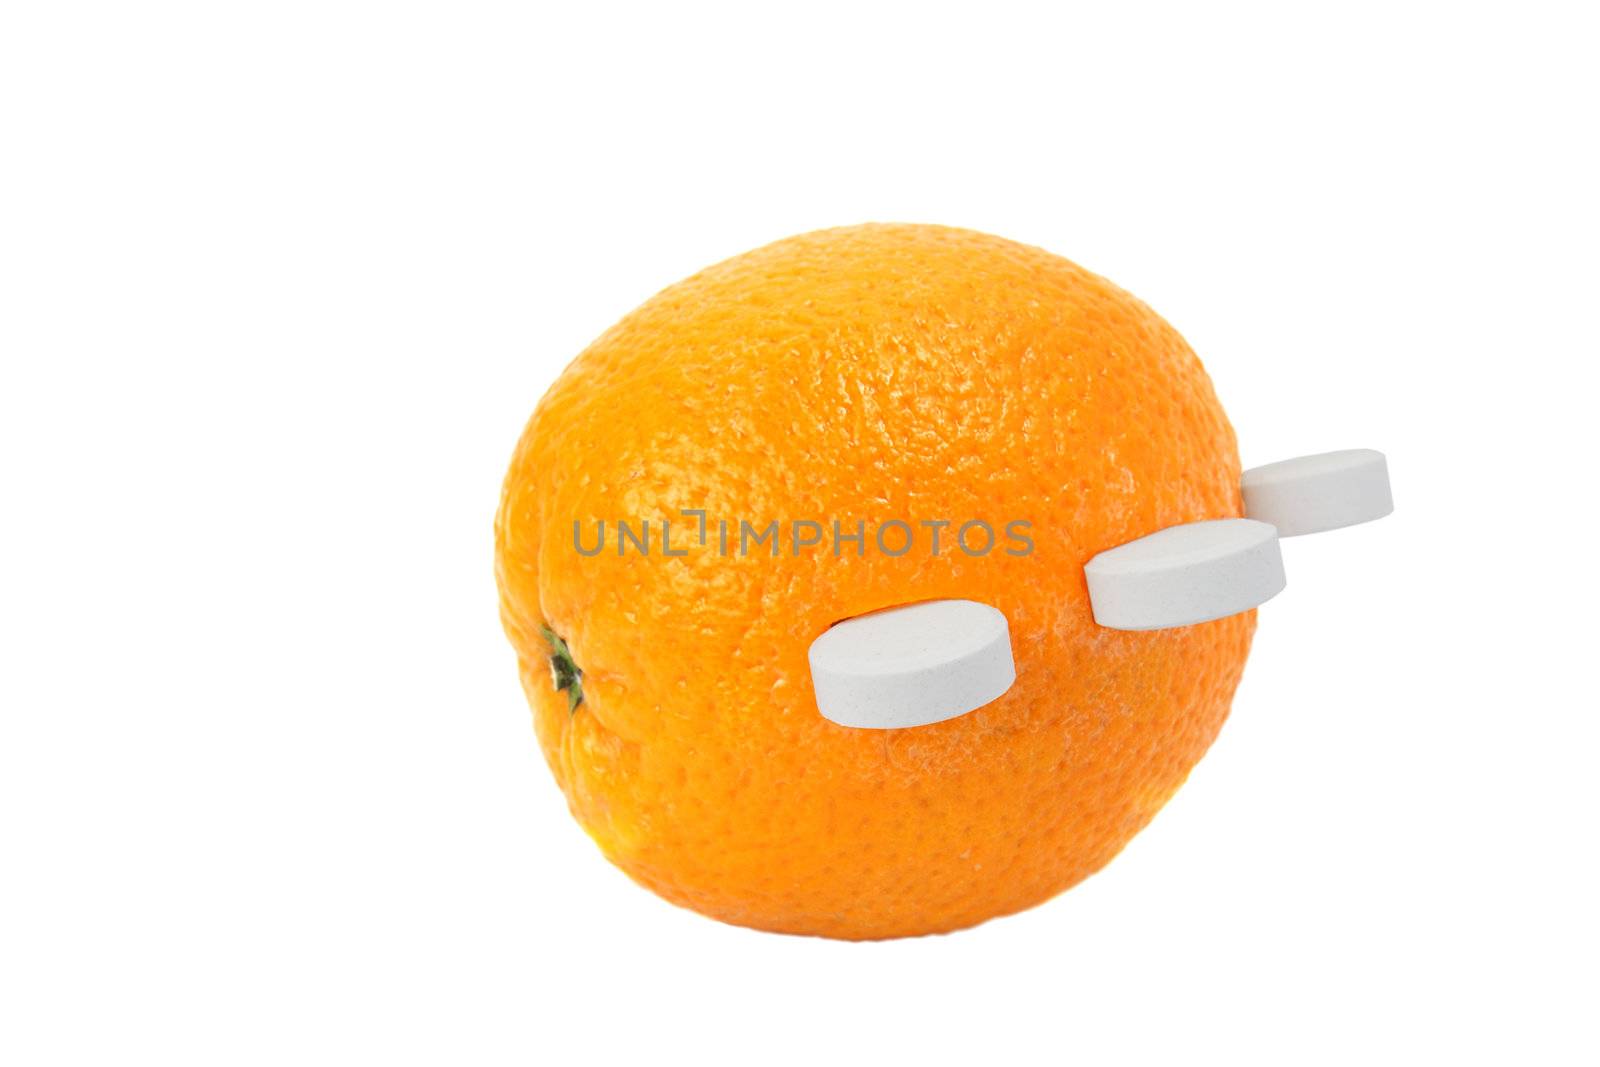 Ripe orange with white round tablets of vitamin C isolated on white background